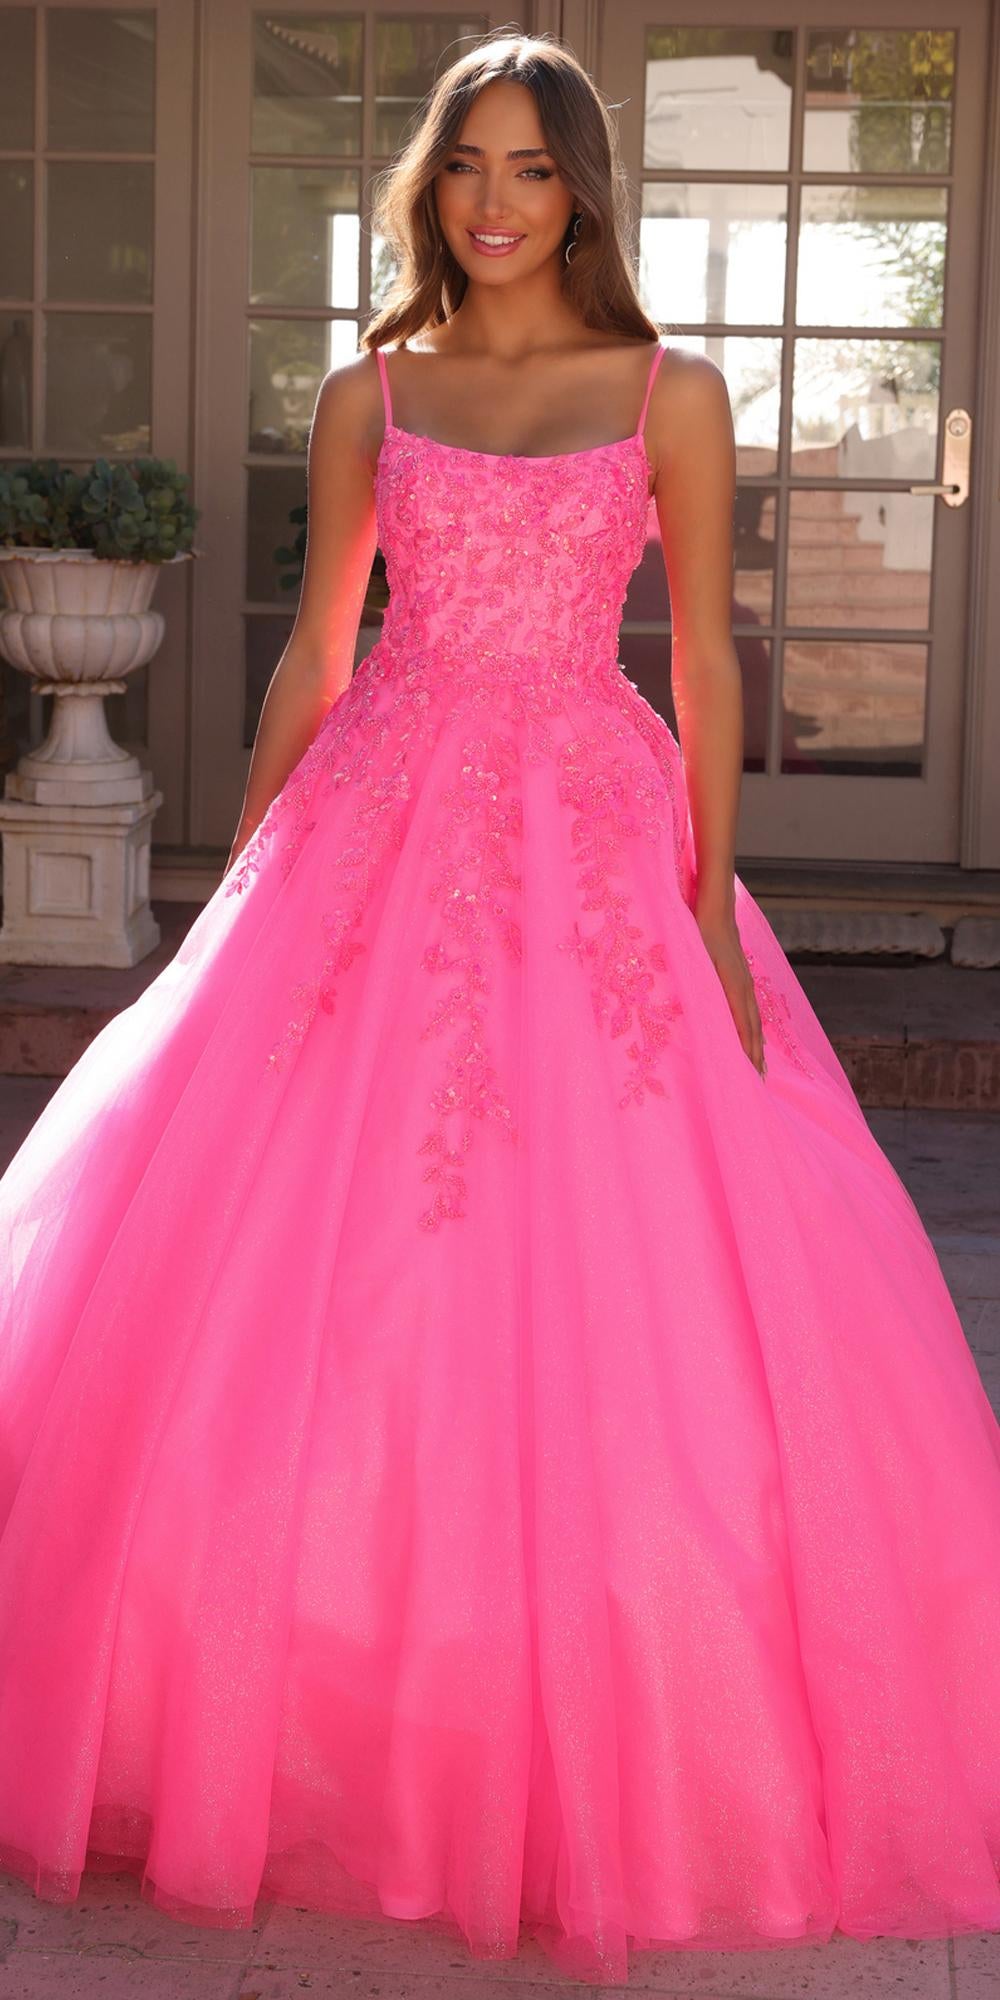 Nox Anabel H1464 Square Neck Poofy A-Line Quinceanera Gown